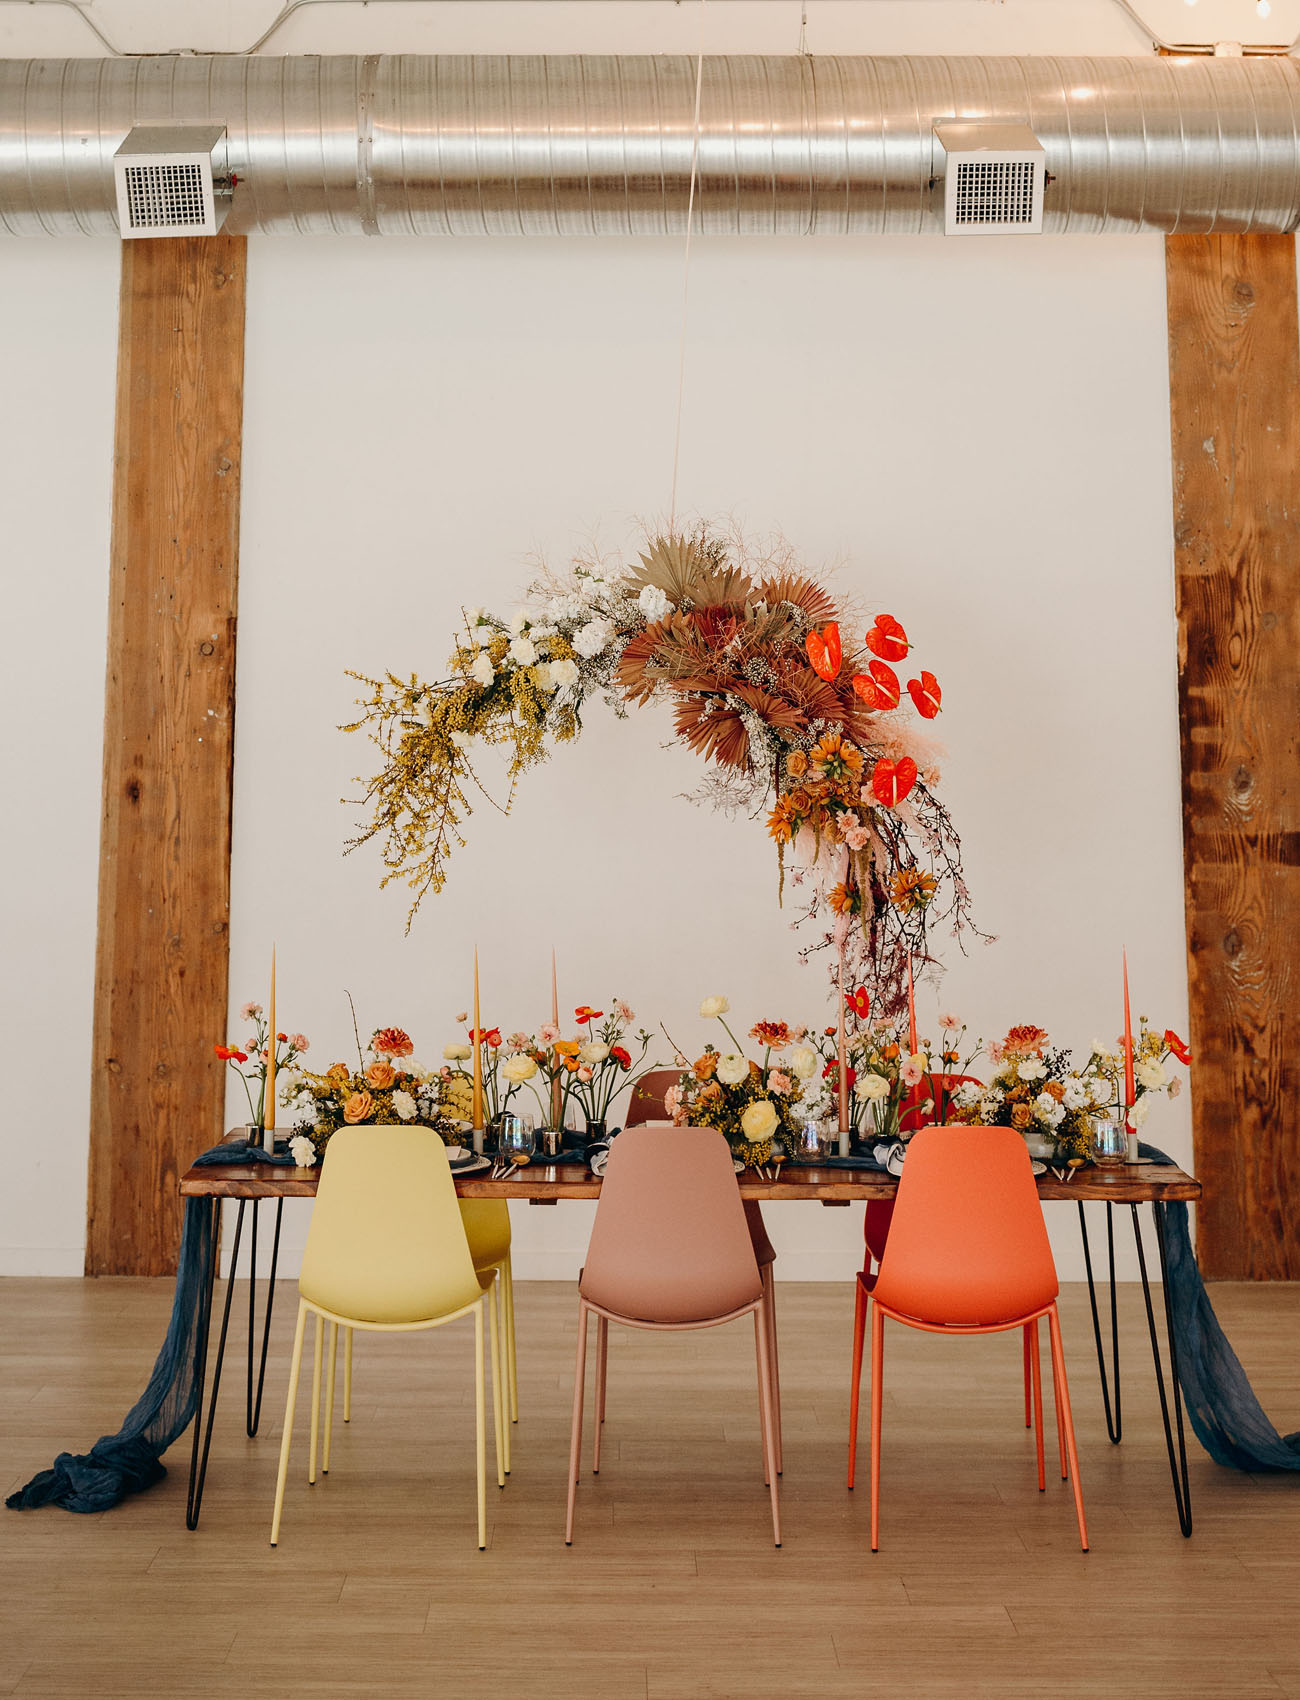 The wedding reception was done with a large overhead floral installation with dried leaves, with bright blooms on the table and a navy runner